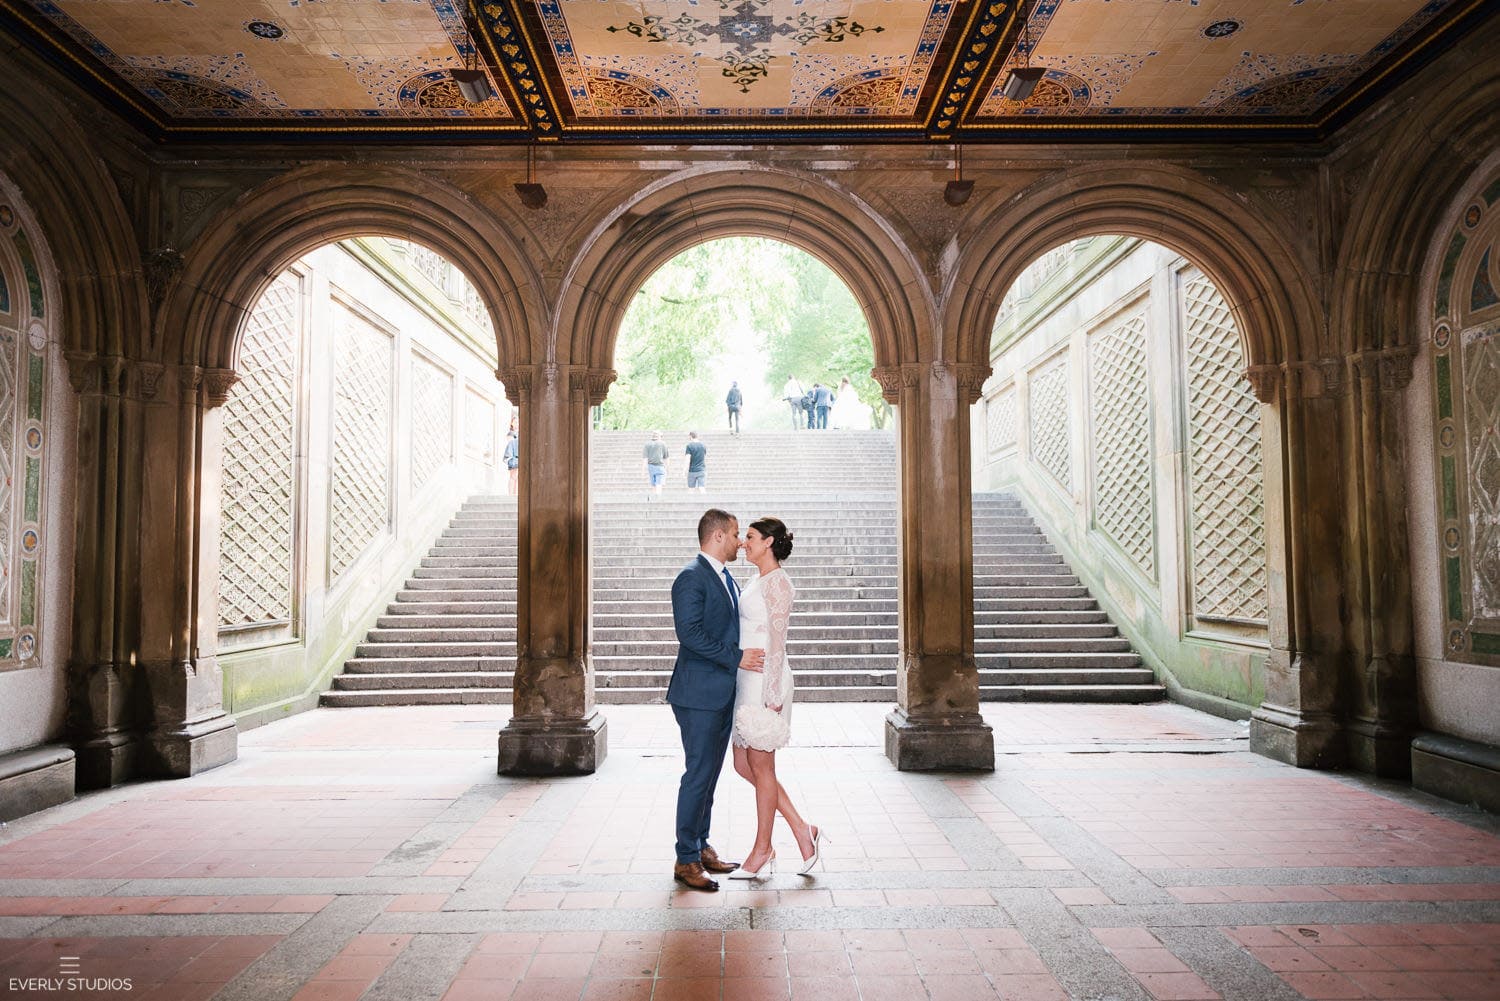 Central Park wedding at Bethesda Terrace. Iconic New York wedding locations with a view. Photo by Brooklyn wedding photographer Everly Studios, www.everlystudios.com